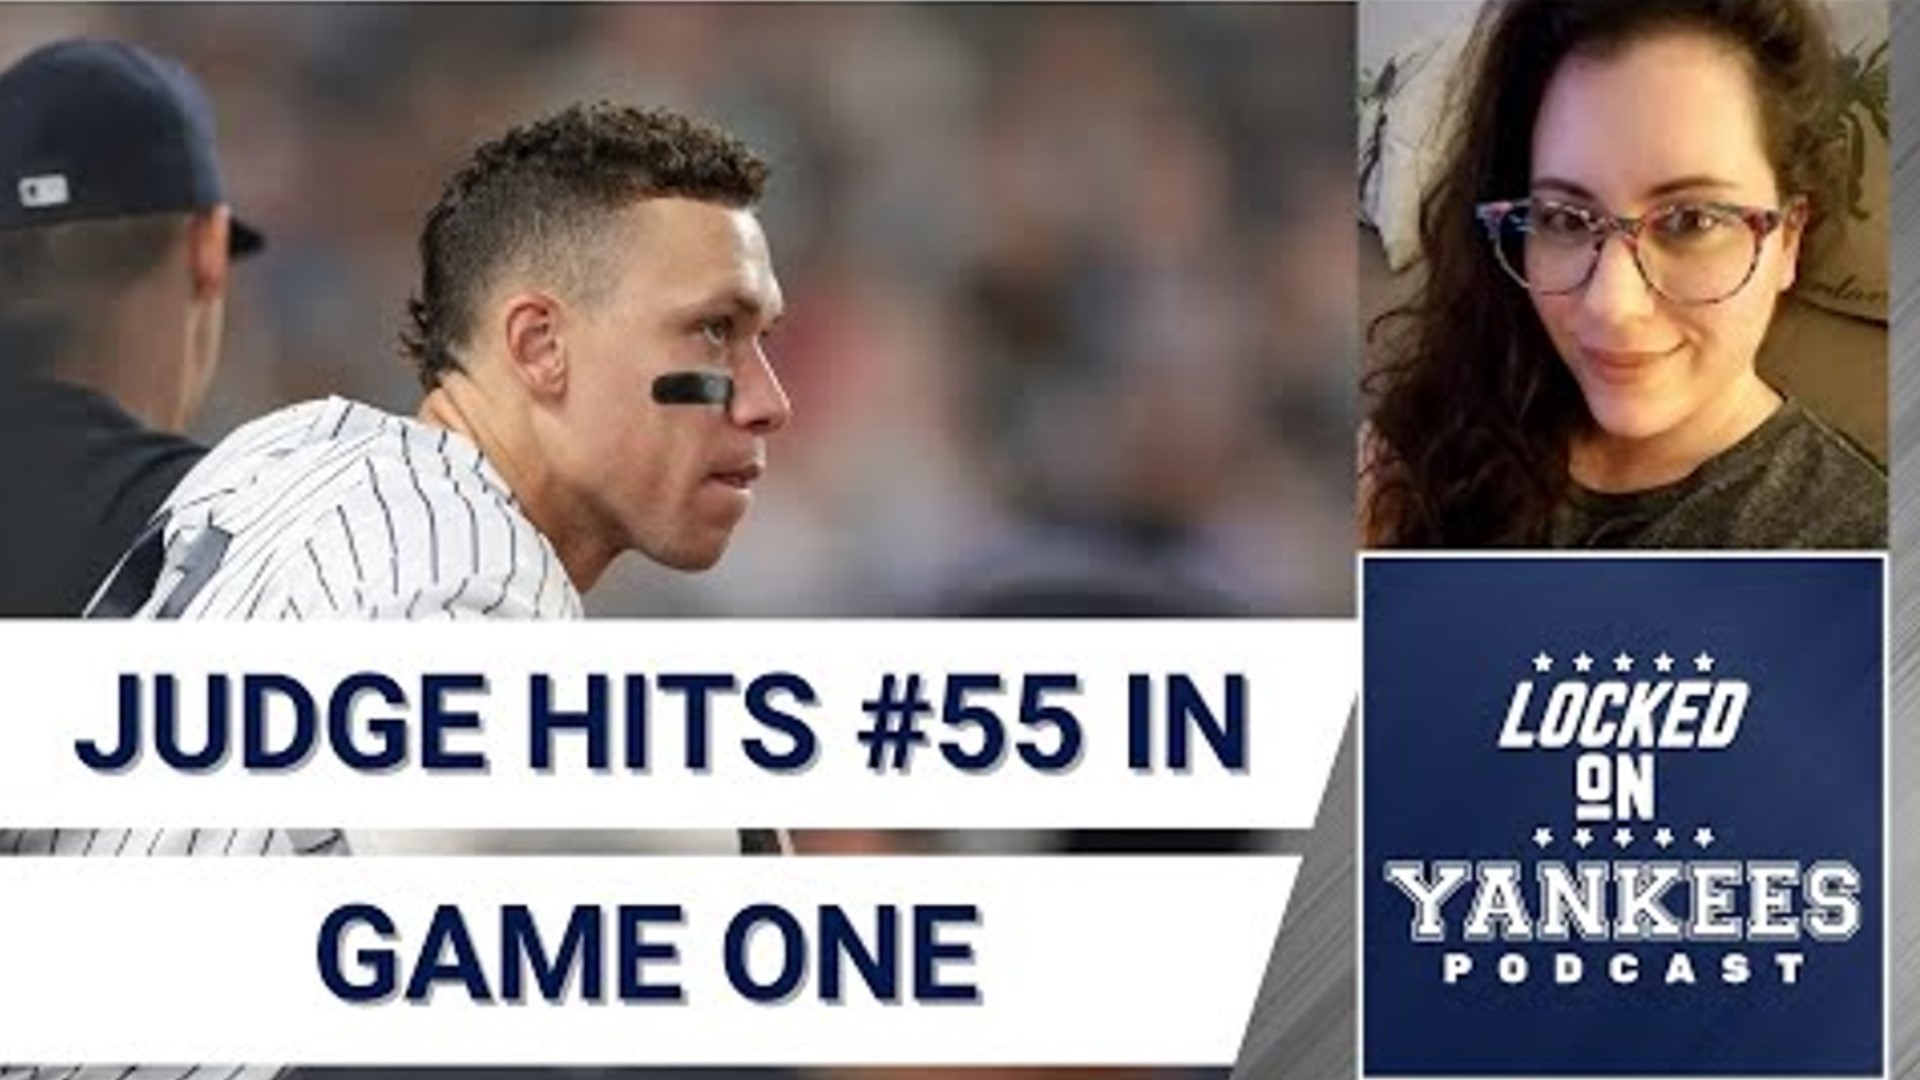 It's a doubleheader day, and Stacey is watching Game 1 in today's show. Stacey complains about the lineup being a minor league lineup and talks about Aaron Judge.